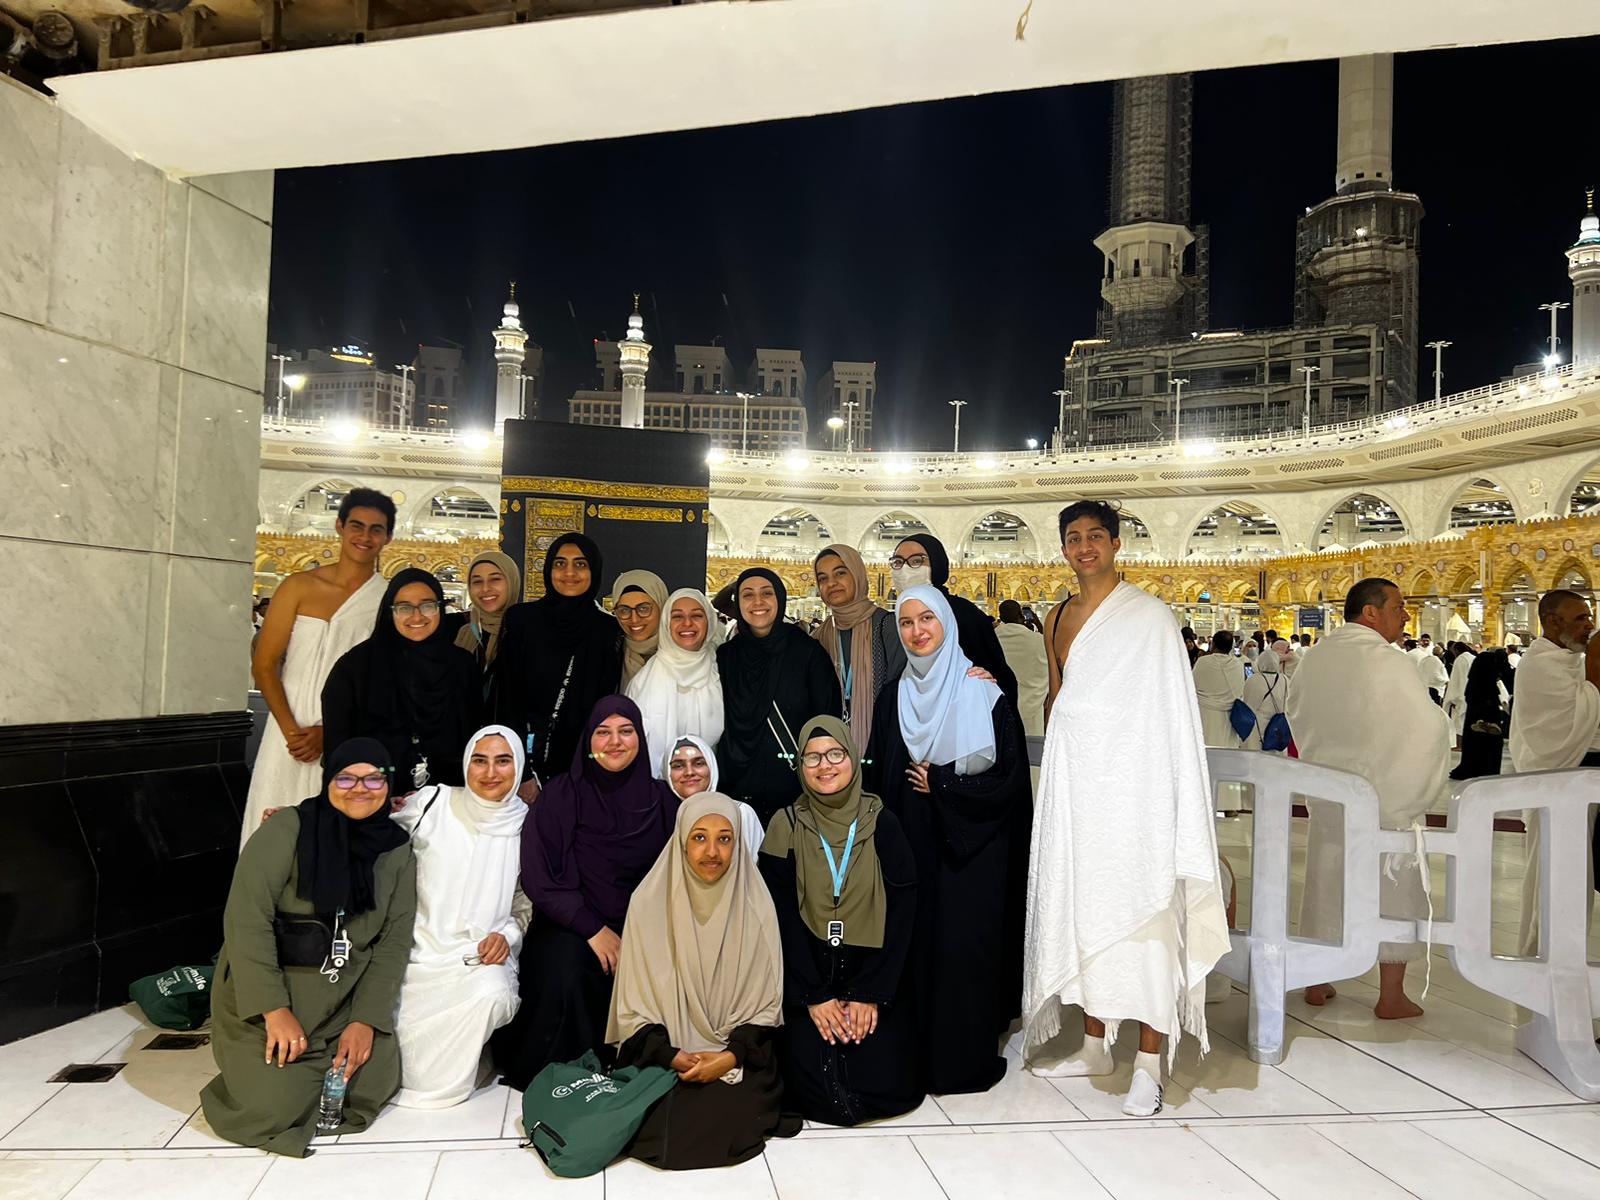 The Kaaba a stone building at the center of Islam's most important mosque and holiest site stands behind a group of muslim women with two muslim